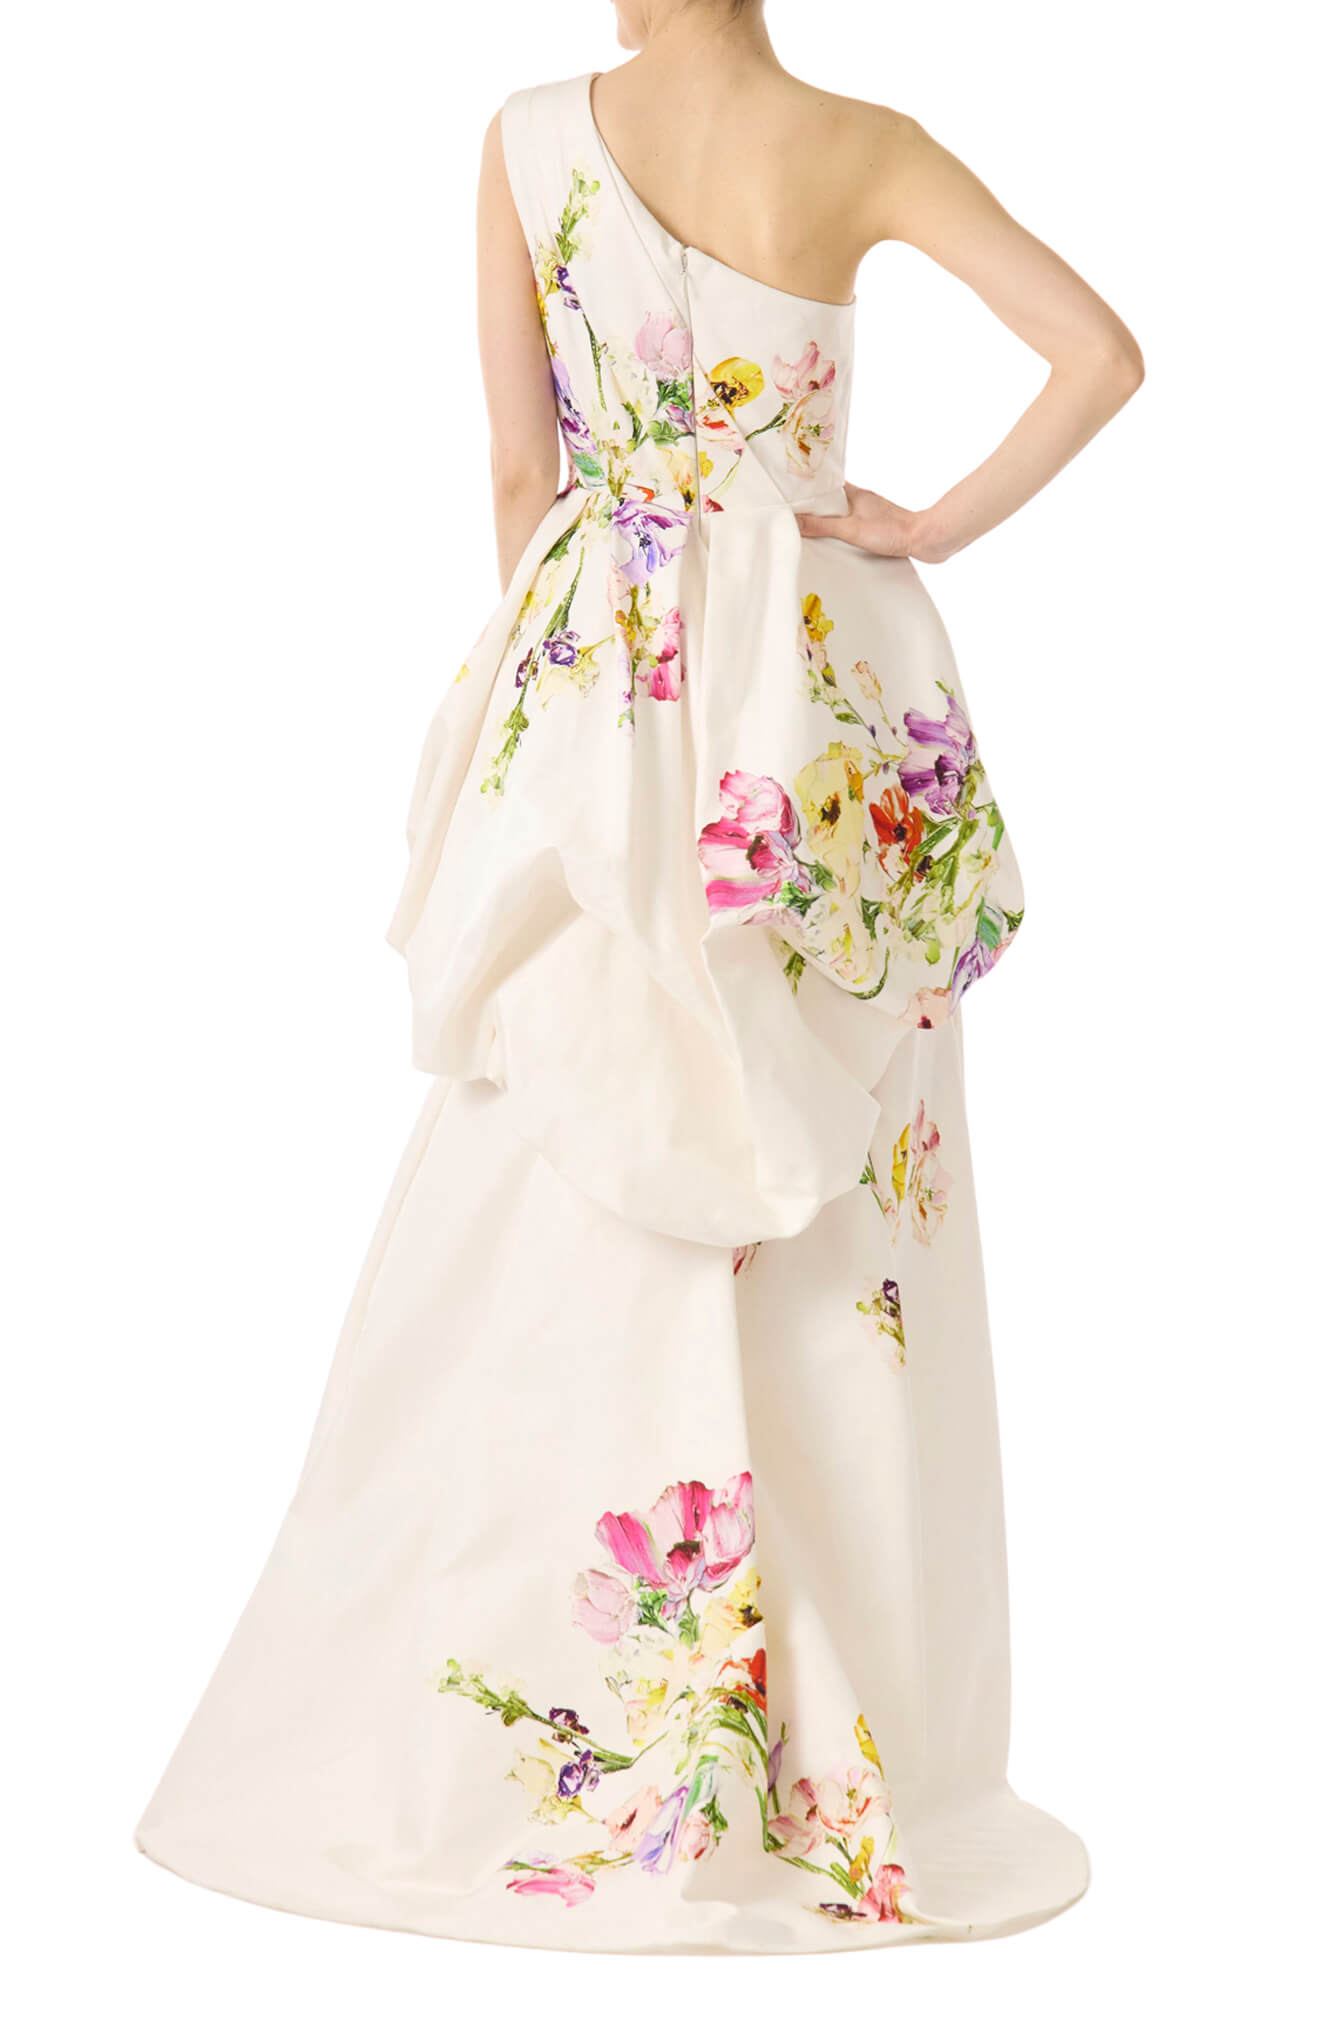 Monique Lhuillier silk white botanical printed mikado gown with one shoulder neckline and tufted skirt.